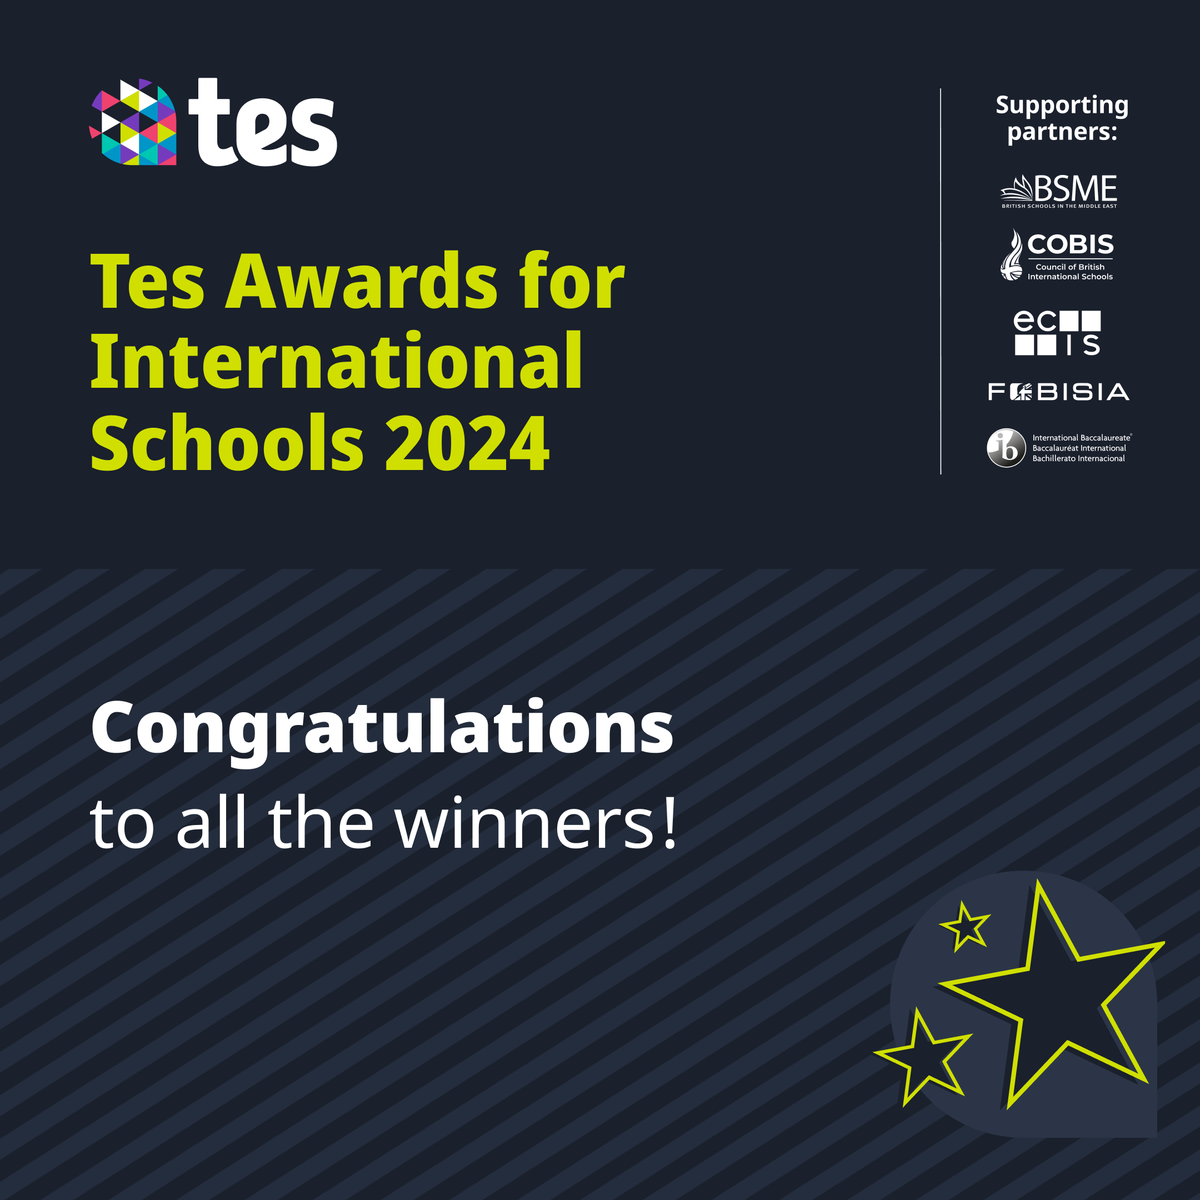 A massive congratulations to all the winners of the @IntlTes Awards for International Schools 2024, particularly to our member schools! 👏 @stchrisbahrain @Walesschool @HorizonDubaiUAE @BCAbuDhabi @SchoolWesgreen Always wonderful to celebrate exceptional schools and educators!